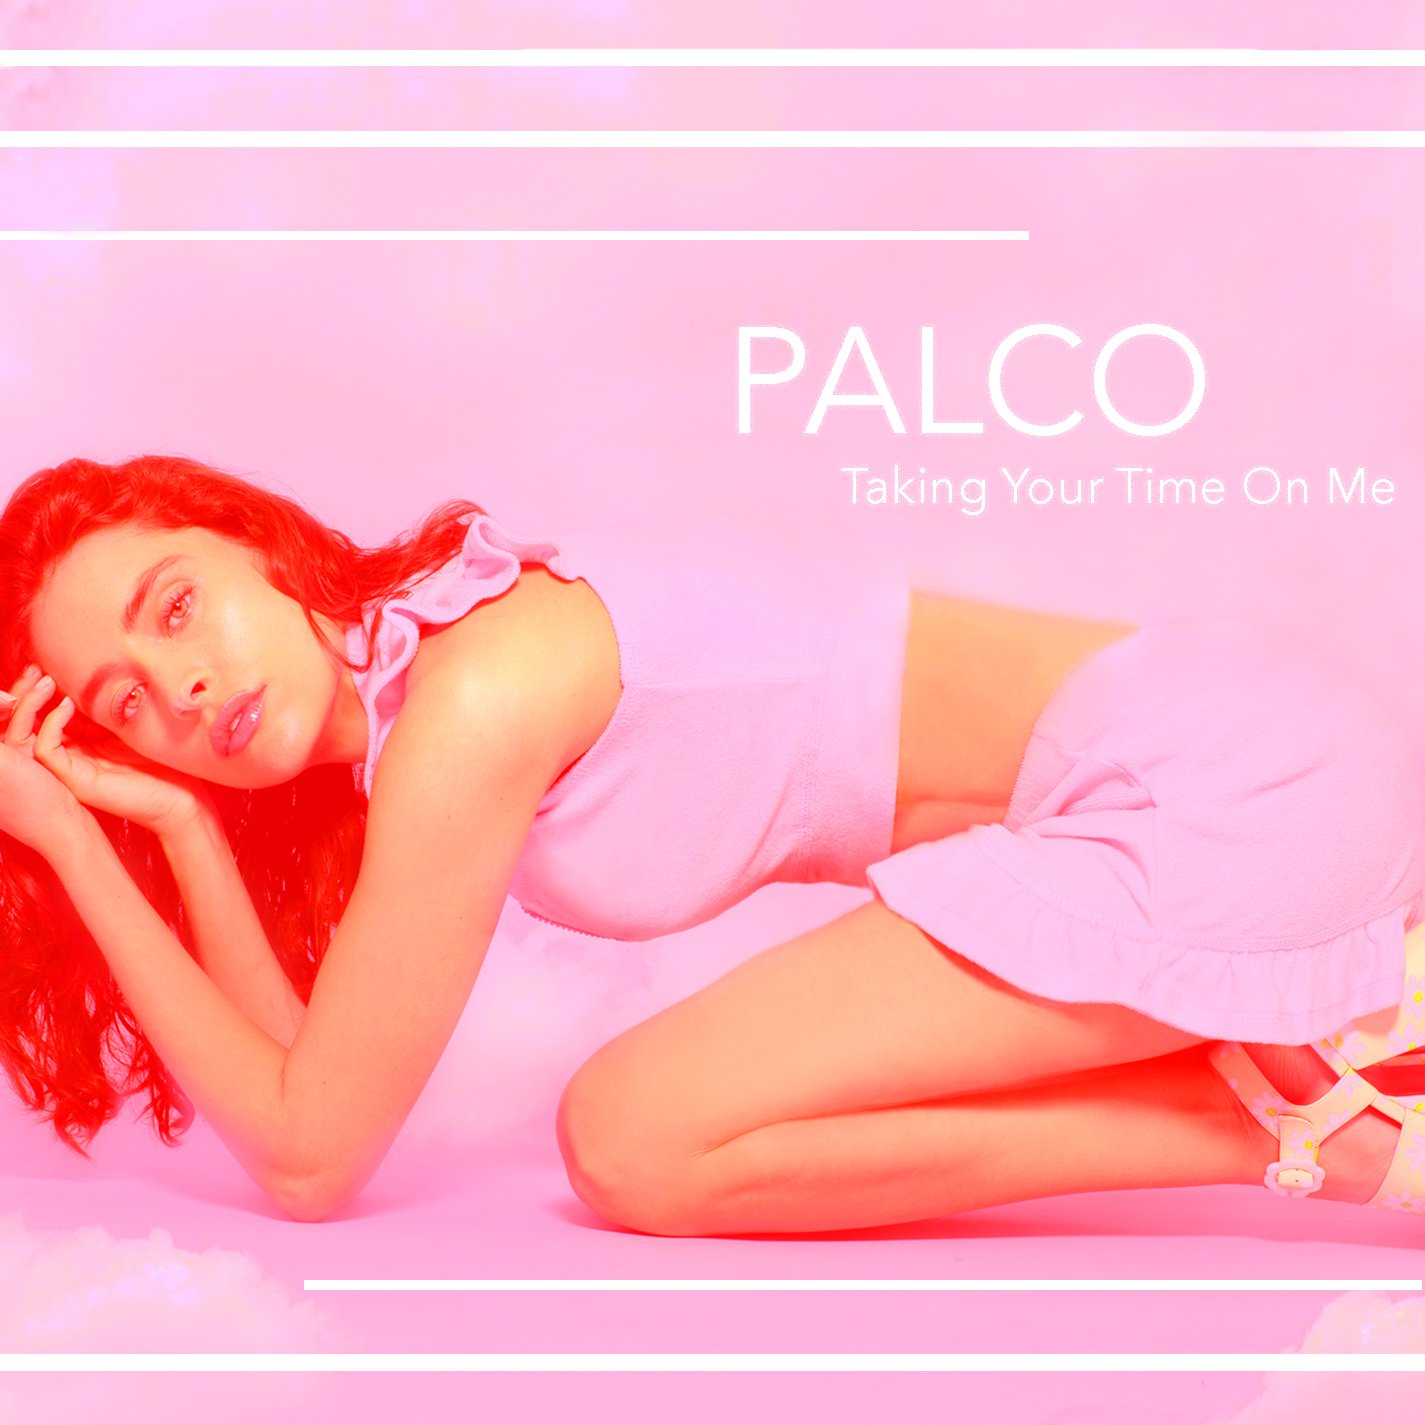 music video - taking your time - by - palco - indie music - new music - indie pop - music blog - indie blog - wolf in a suit - wolfinasuit - wolf in a suit blog - wolf in a suit music blog